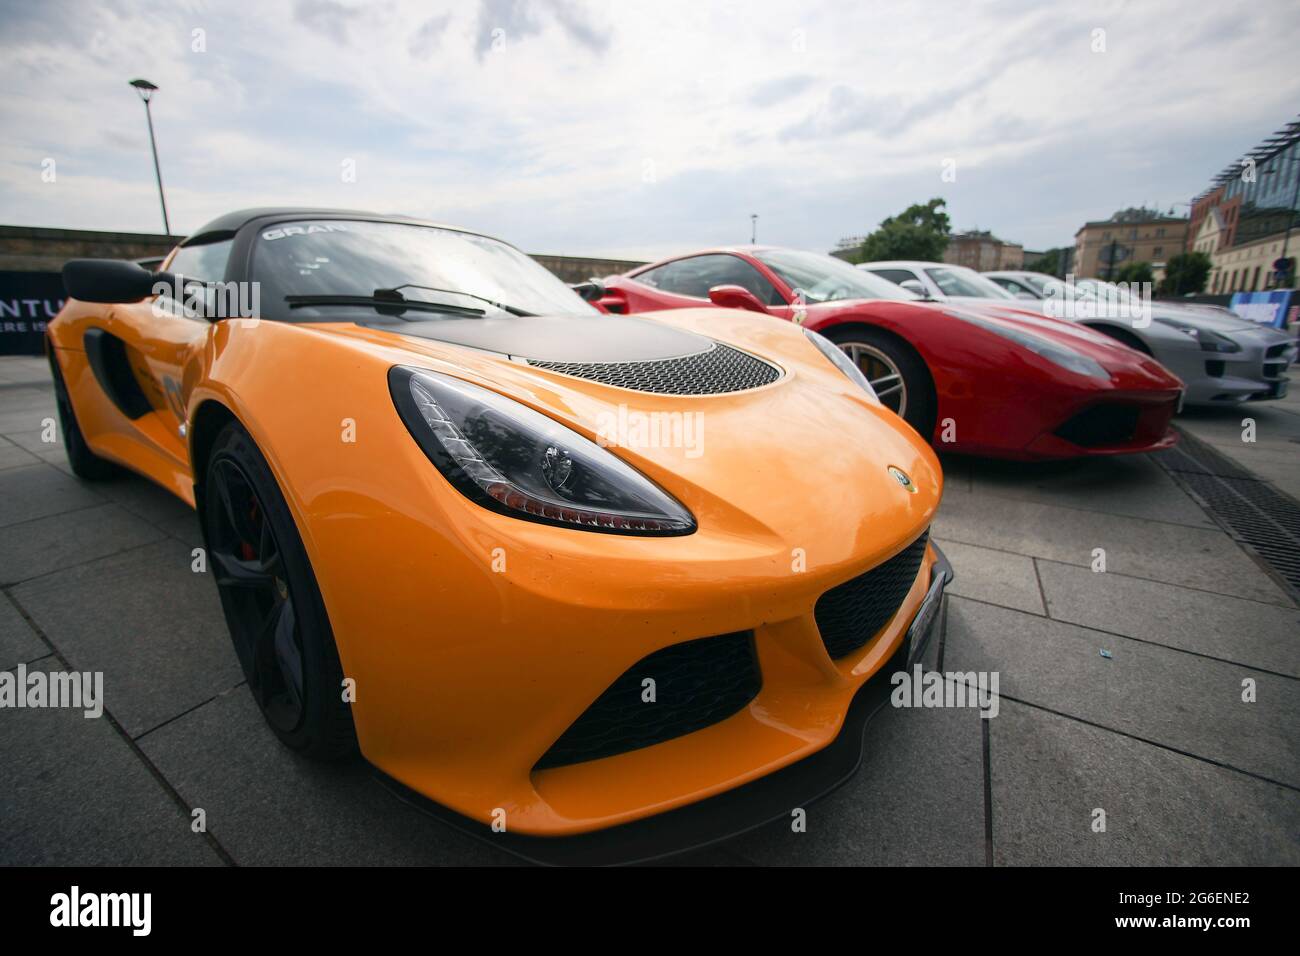 Kracow, Poland. 02nd July, 2021. A yellow Lotus car is parked on the street during the Gran Turismo Polonia in Cracow.The biggest convention of supercars in Poland, Gran Turismo Polonia, took place in Cracow. Over 100 vehicles (e.g. Ferrari, Porsche, Lamborghini) were parked near the Sheraton Gran hotel during the 17th edition of the event. The value of the cars that took part in the convention was estimated at 120 000 000 PLN. (Photo by Vito Corleone/SOPA Images/Sipa USA) Credit: Sipa USA/Alamy Live News Stock Photo